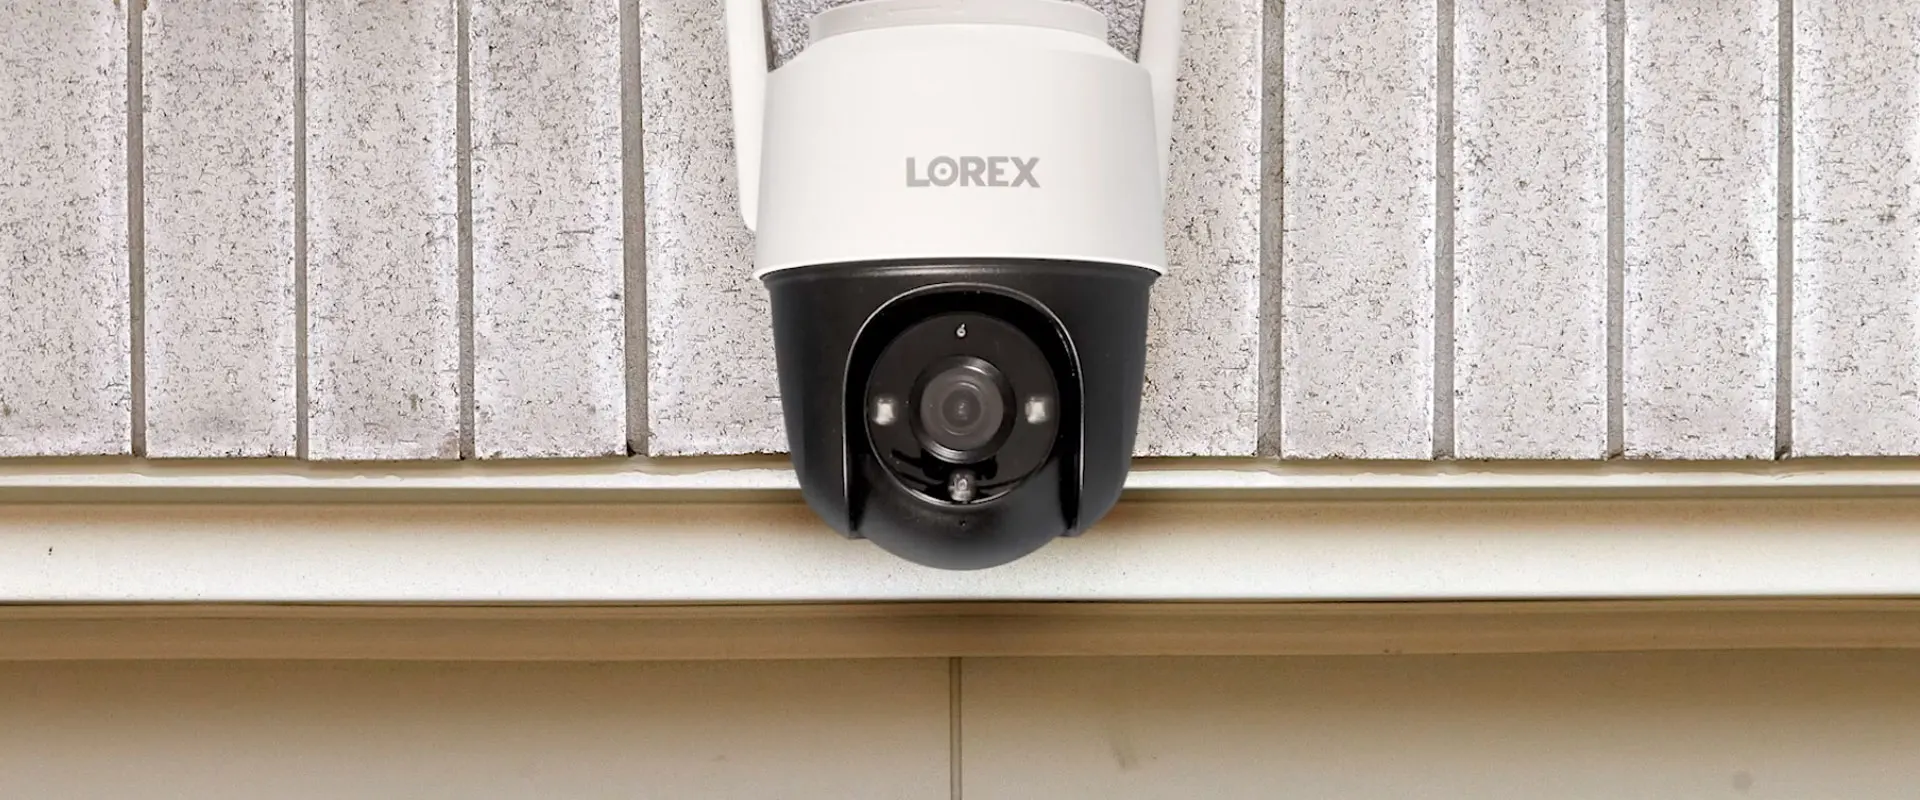 How To Install Lorex Security Camera